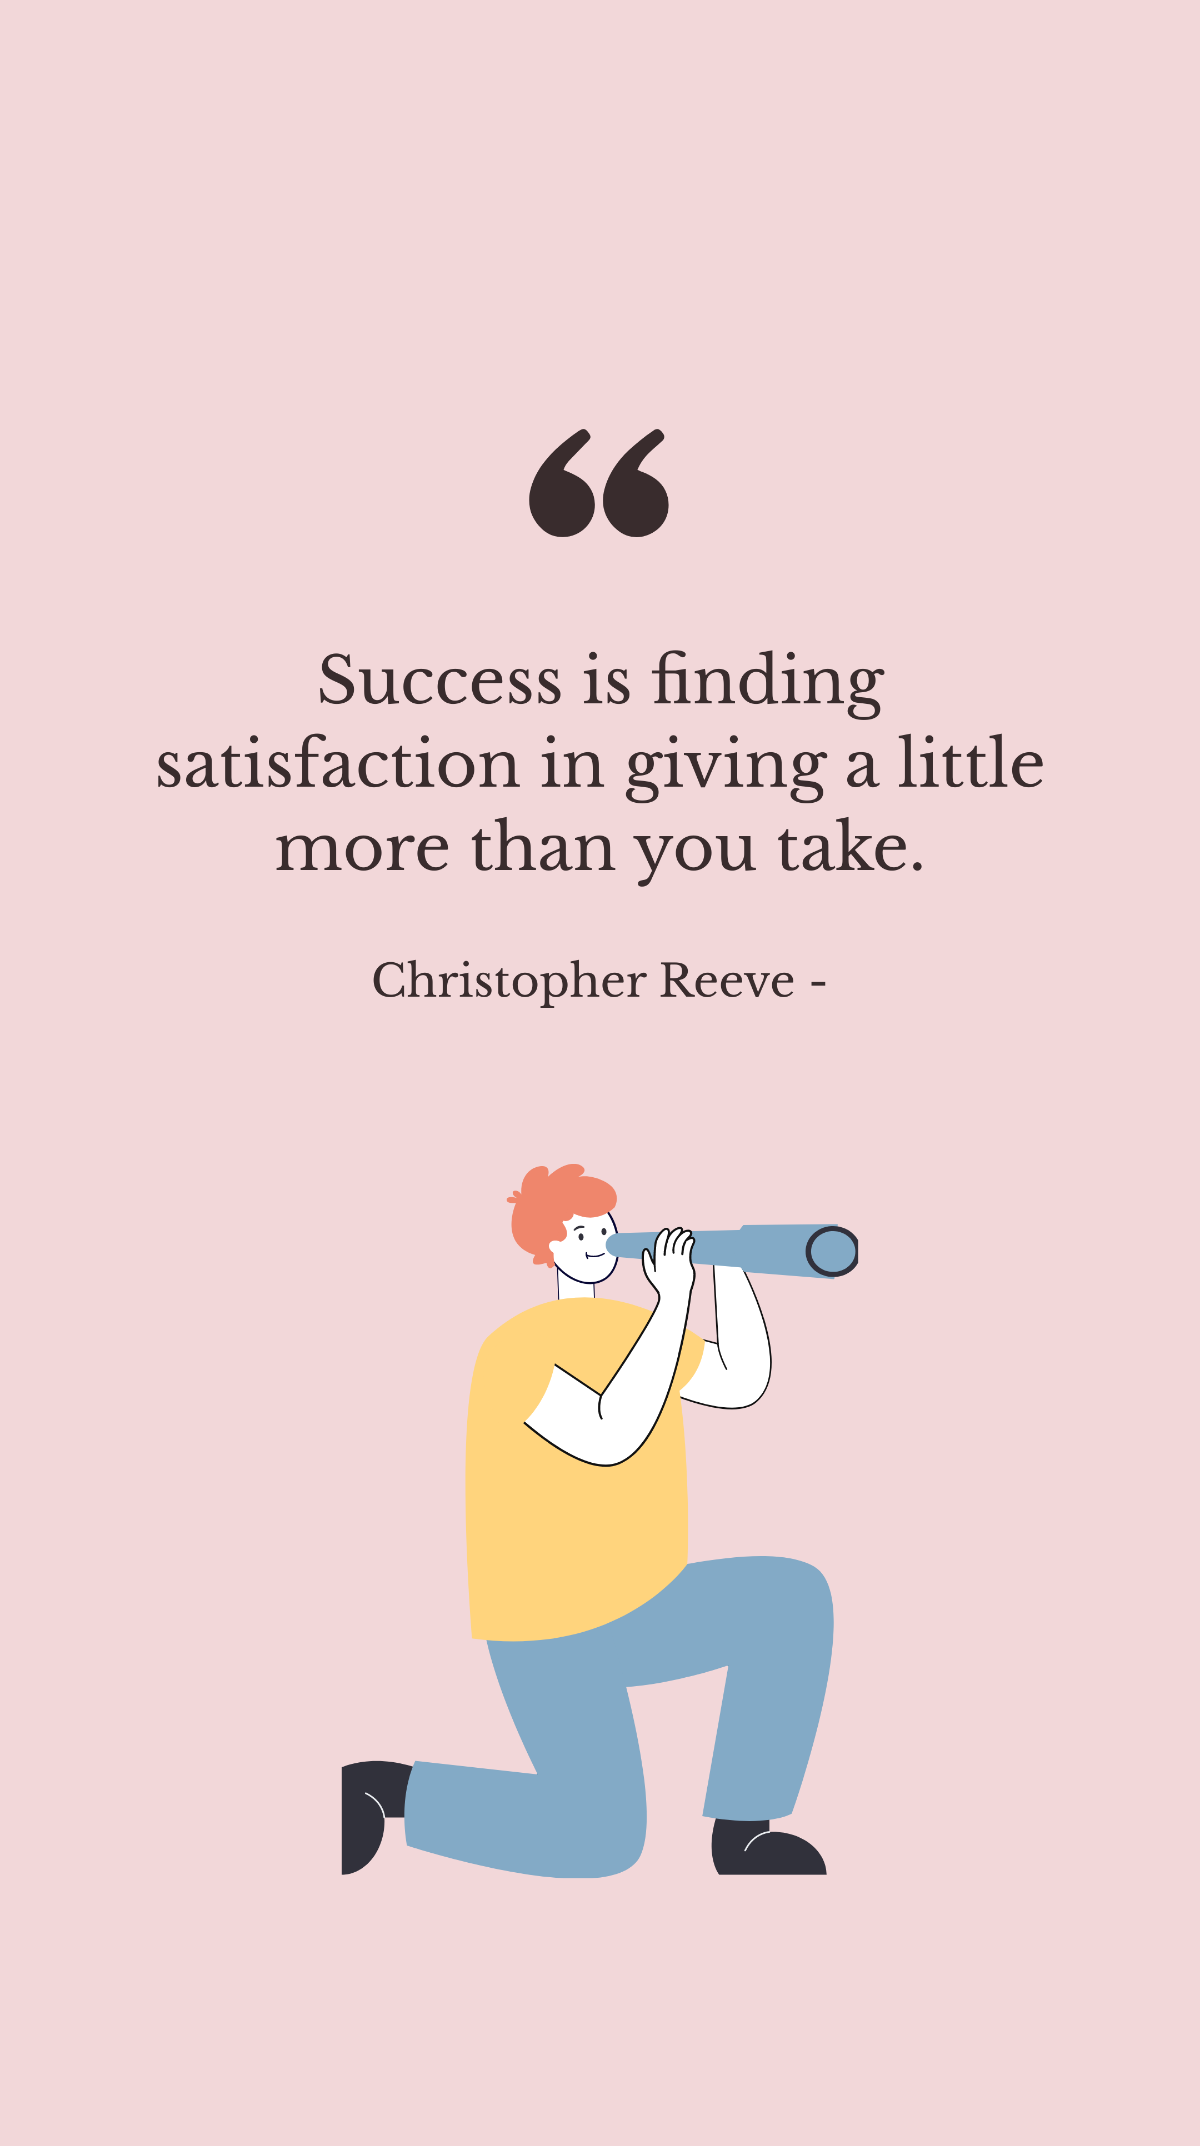 Christopher Reeve - Success is finding satisfaction in giving a little more than you take. Template